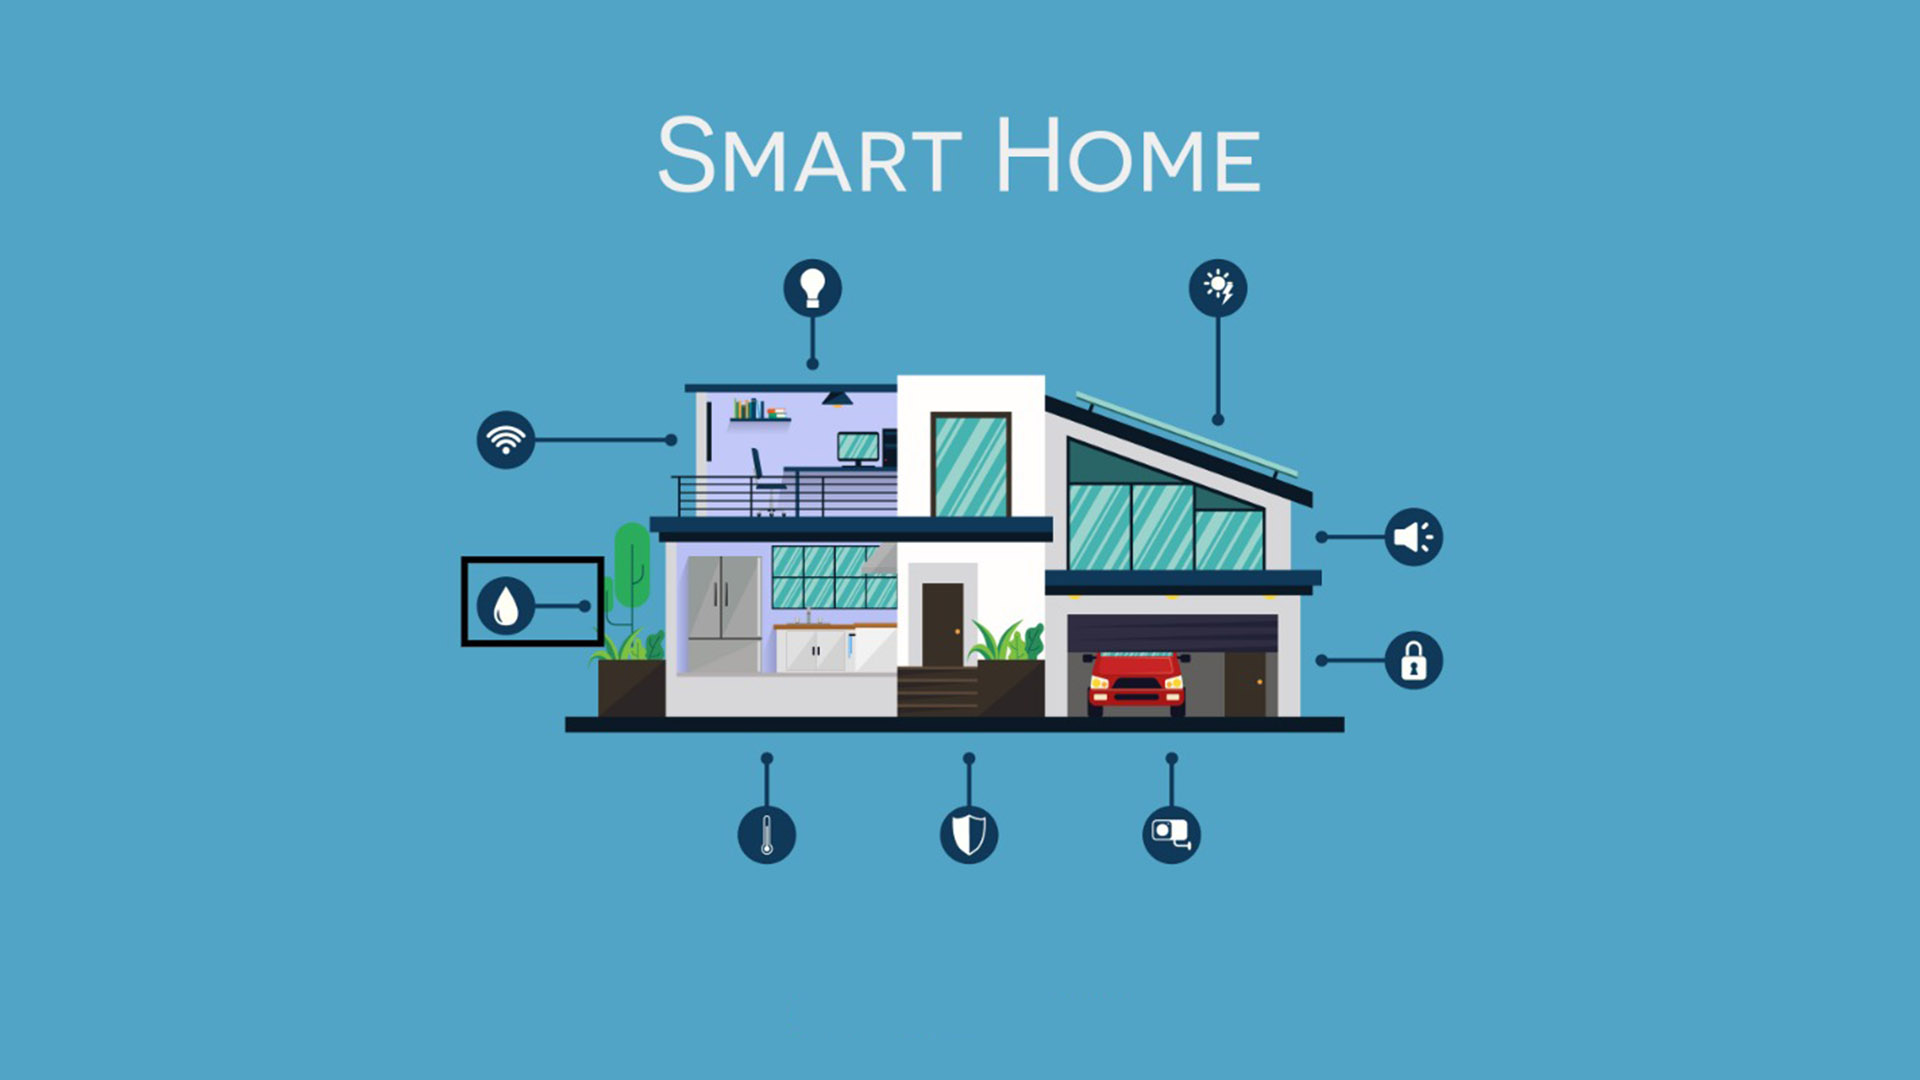 Why IoT Is Needed In Smart Homes